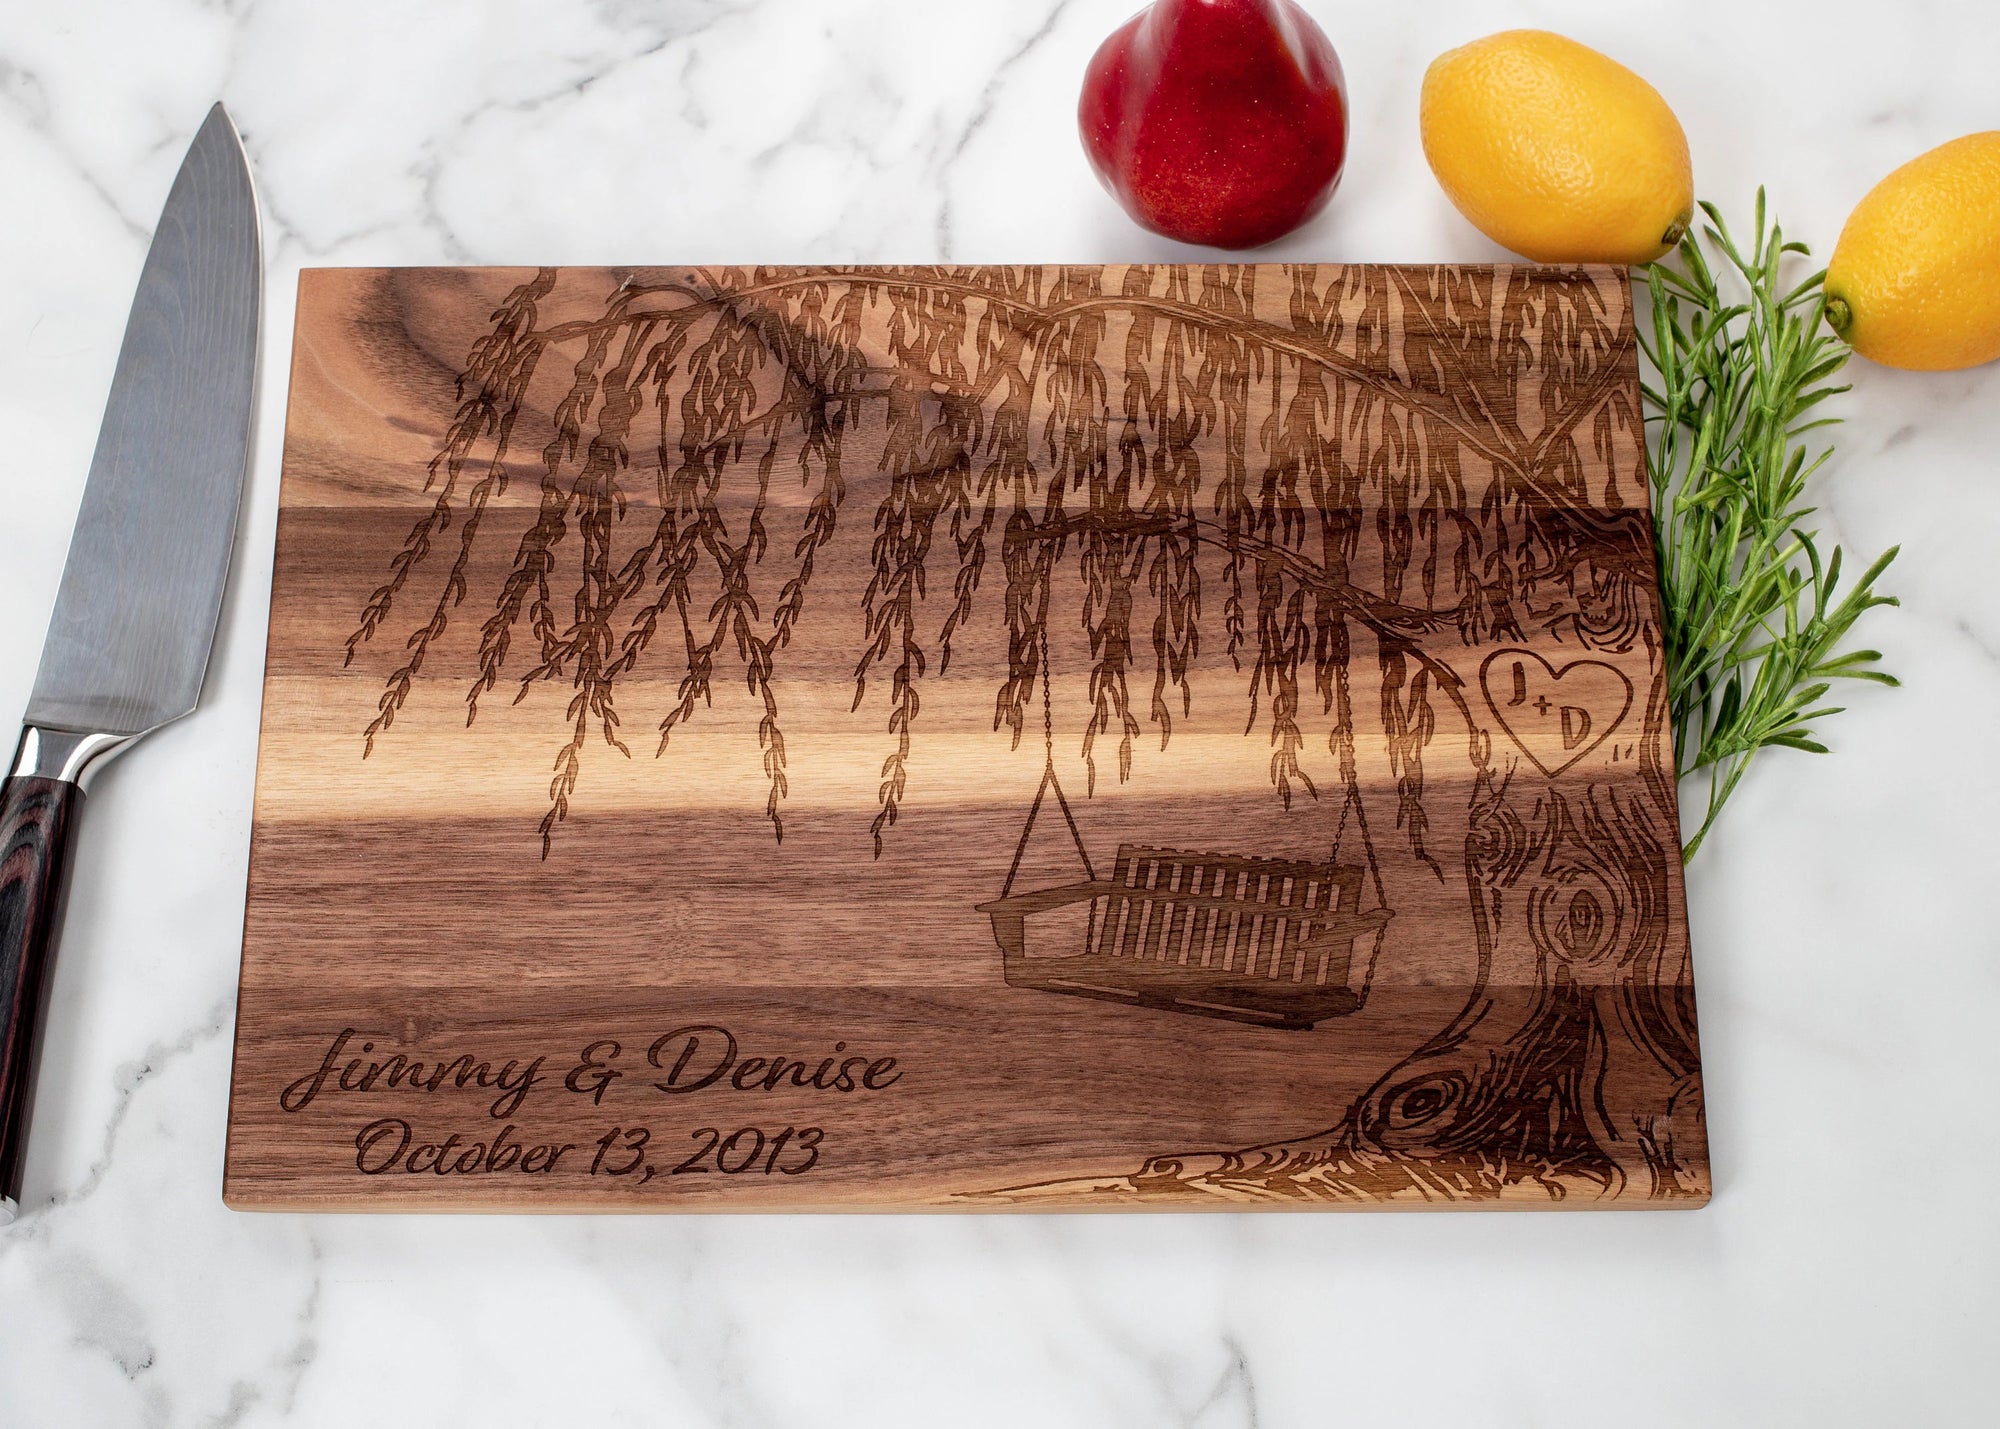 An impeccable selection for your 9th anniversary, this personalized cutting board with an exquisite Willow Tree design is both a work of art and an enduring token of love. Crafted with care from enduring hardwood, this gifted keepsake will remain a cherished reminder of your thoughtfulness and appreciation for years to come, making it a perfect housewarming, wedding, or anniversary gift.